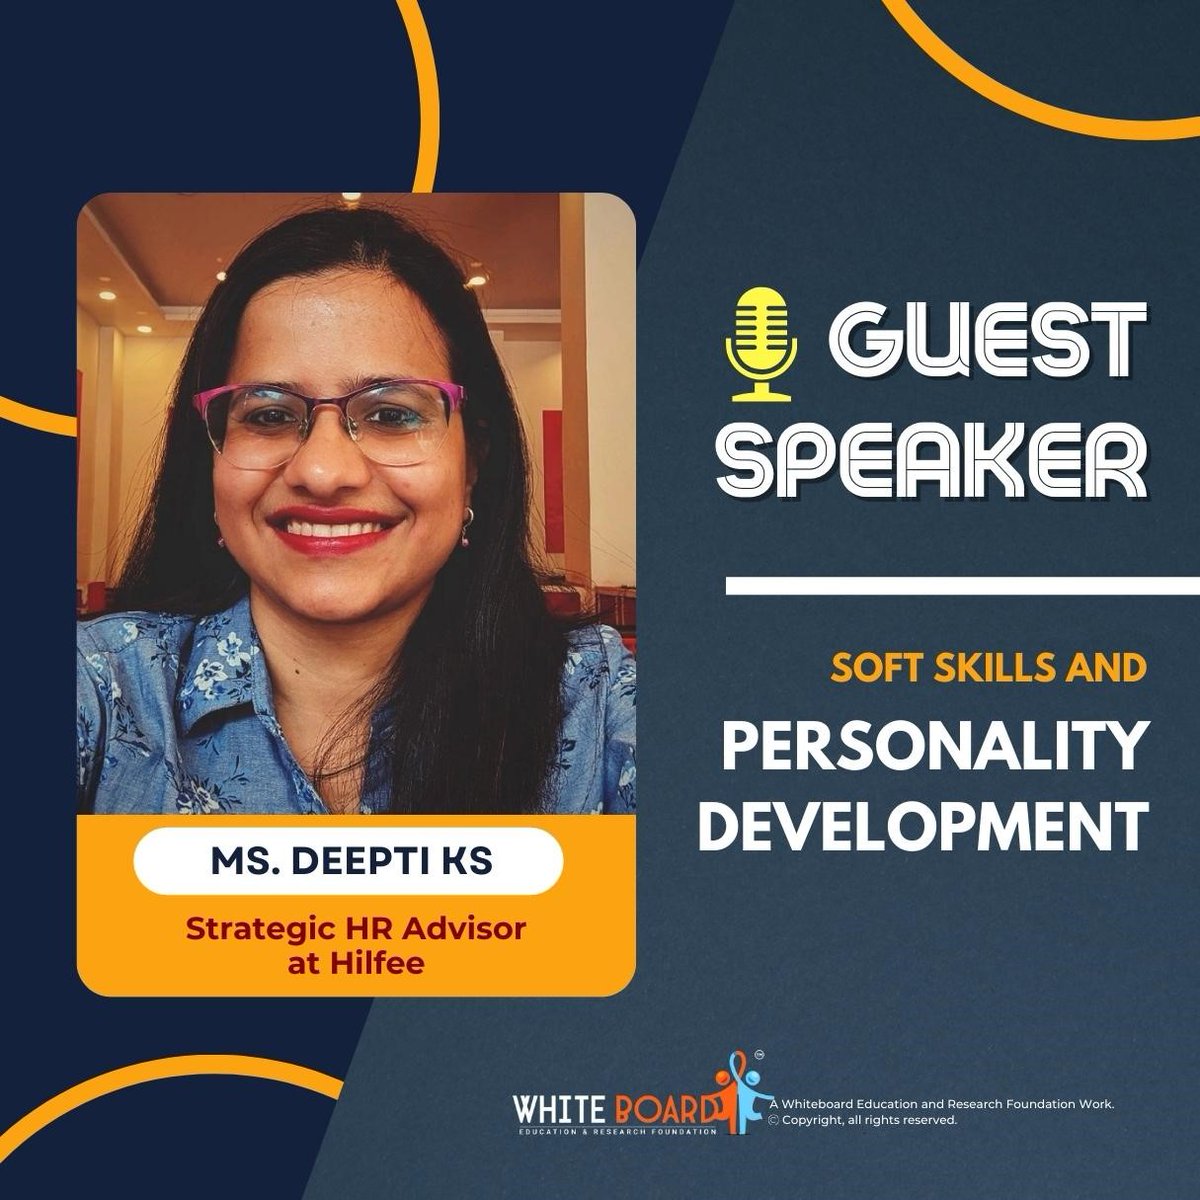 We're incredibly grateful for Ms. Deepti's commitment to the betterment of society and the next generation. We look forward to welcoming her back for future sessions at Whiteboard Foundation.
#Speaker #Bestspeaker #Eventspeaker #Publicspeaker #Session #livesession #SoftSkills